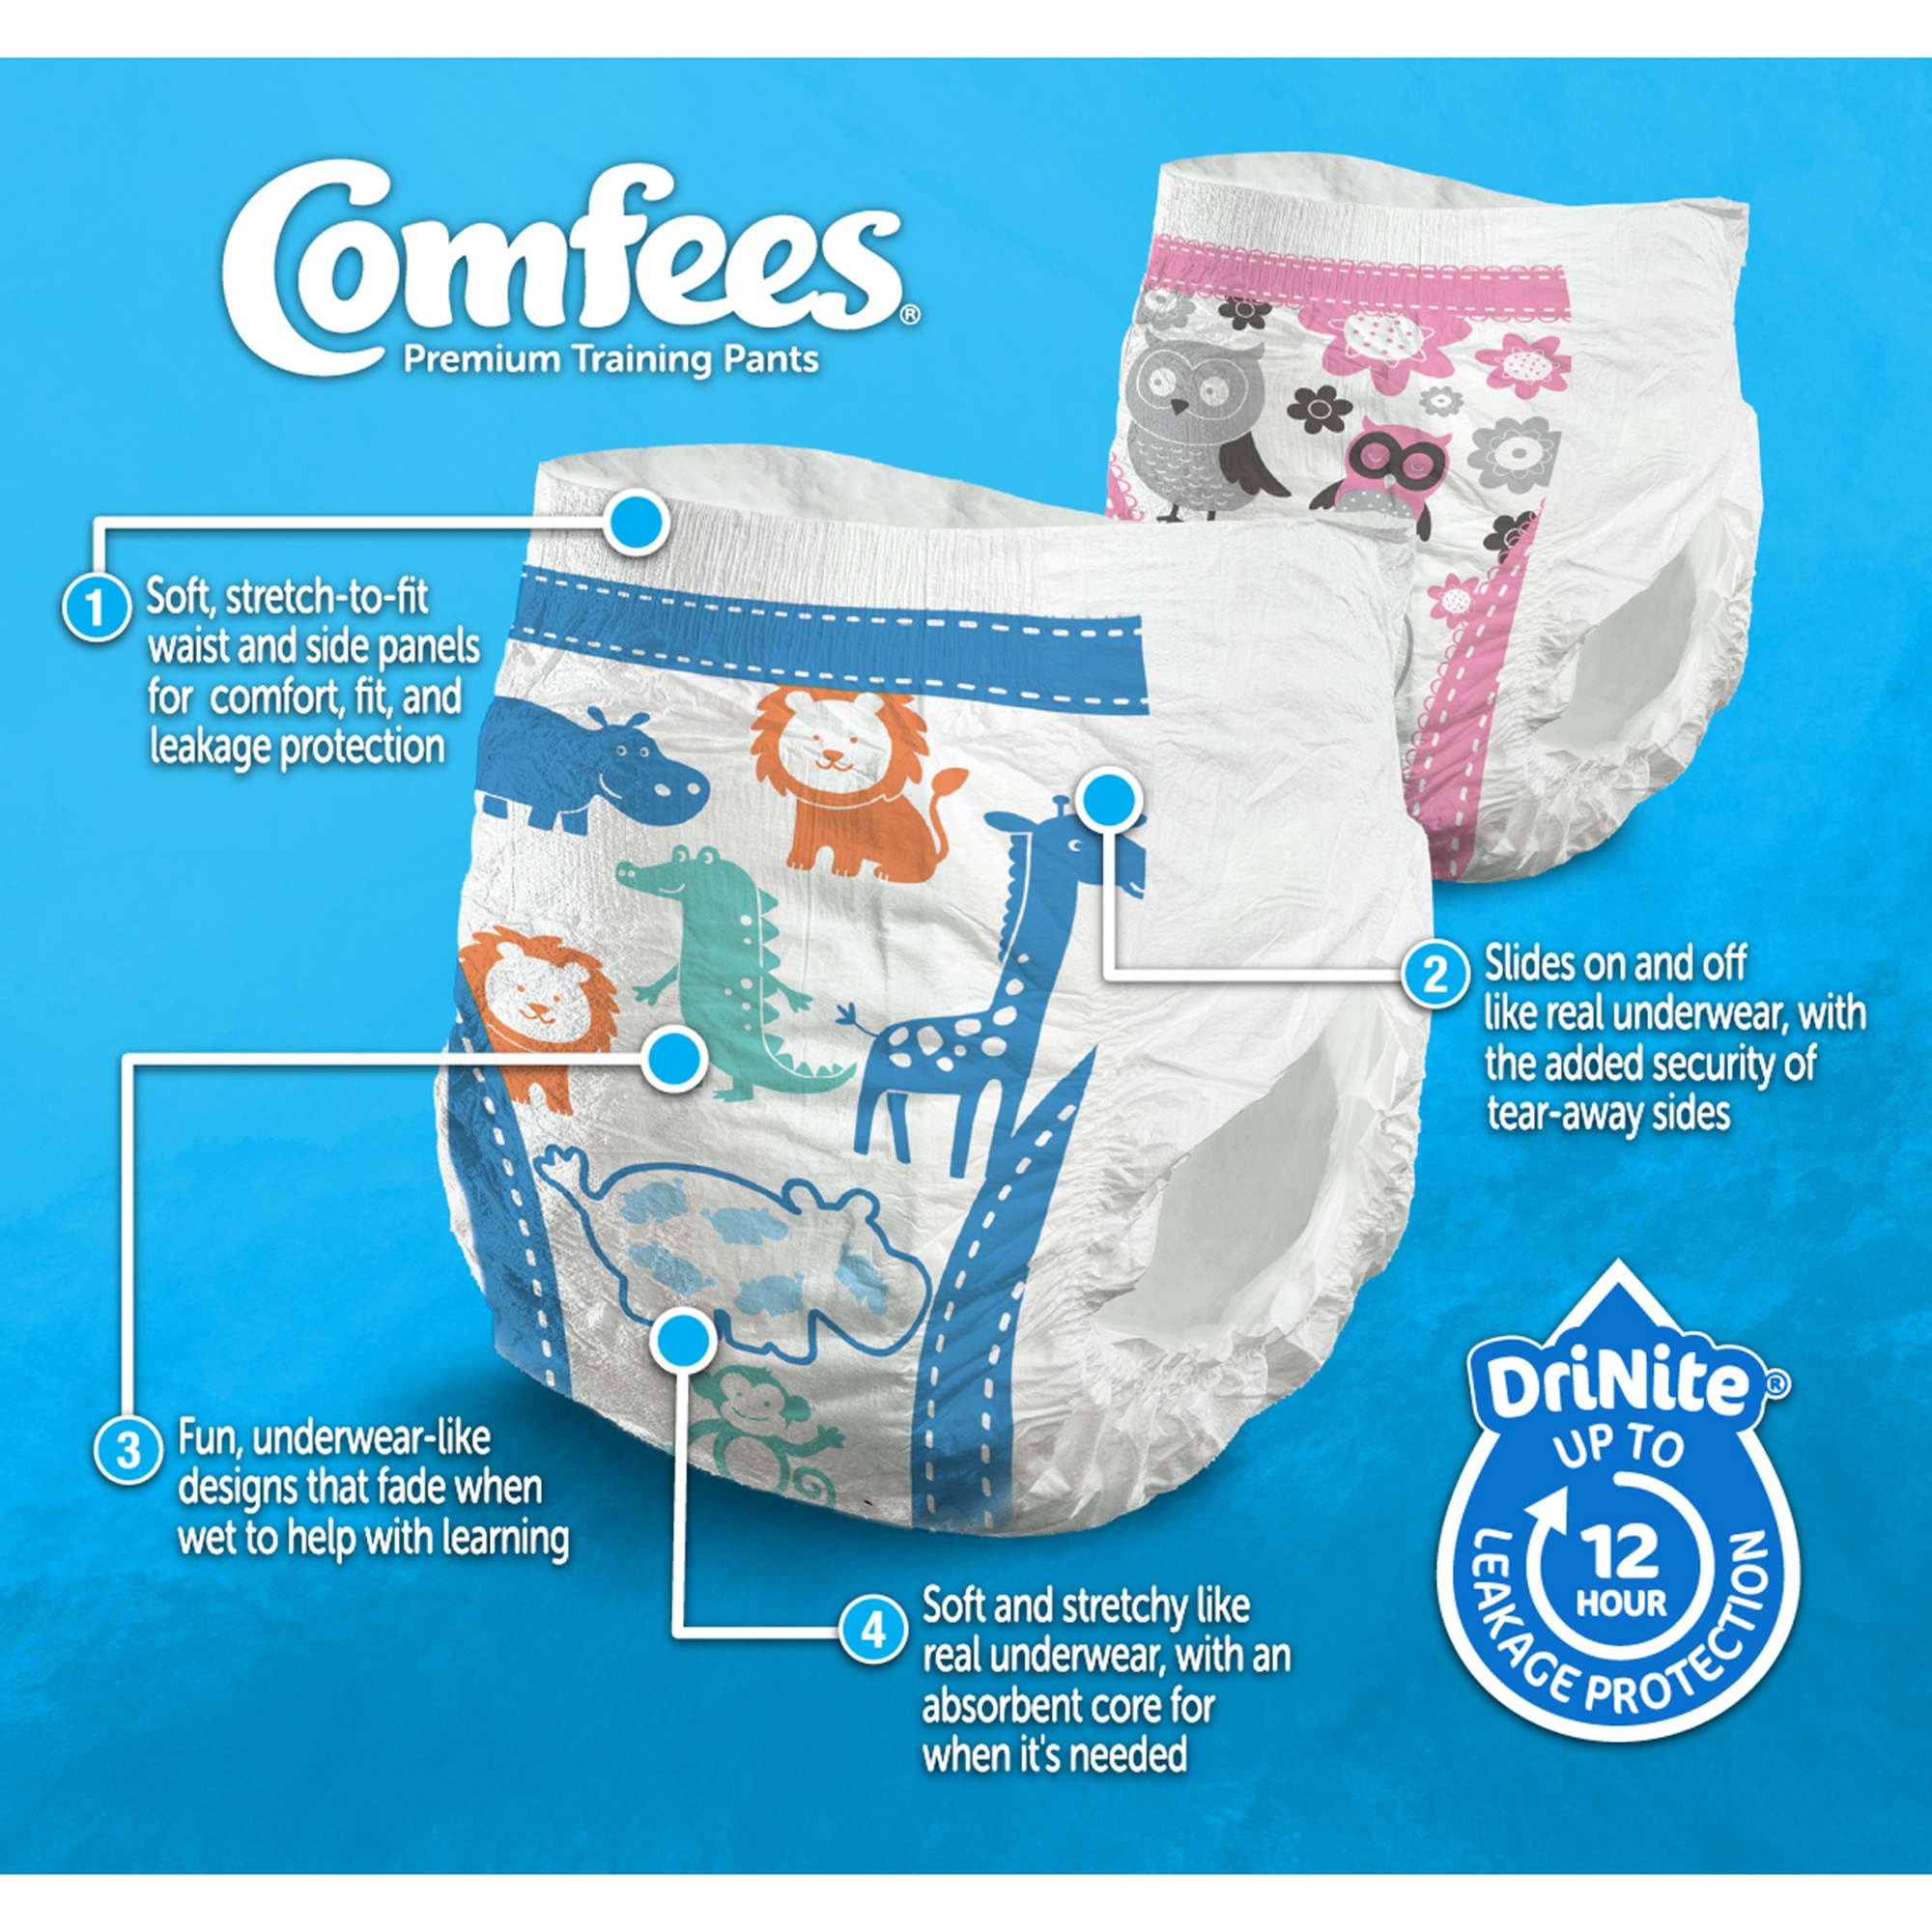 Comfees Training Pants for Boys, 12 hour leak protection 4T to 5T, over 38 lbs, 19 Count, 1 Pack - image 4 of 4